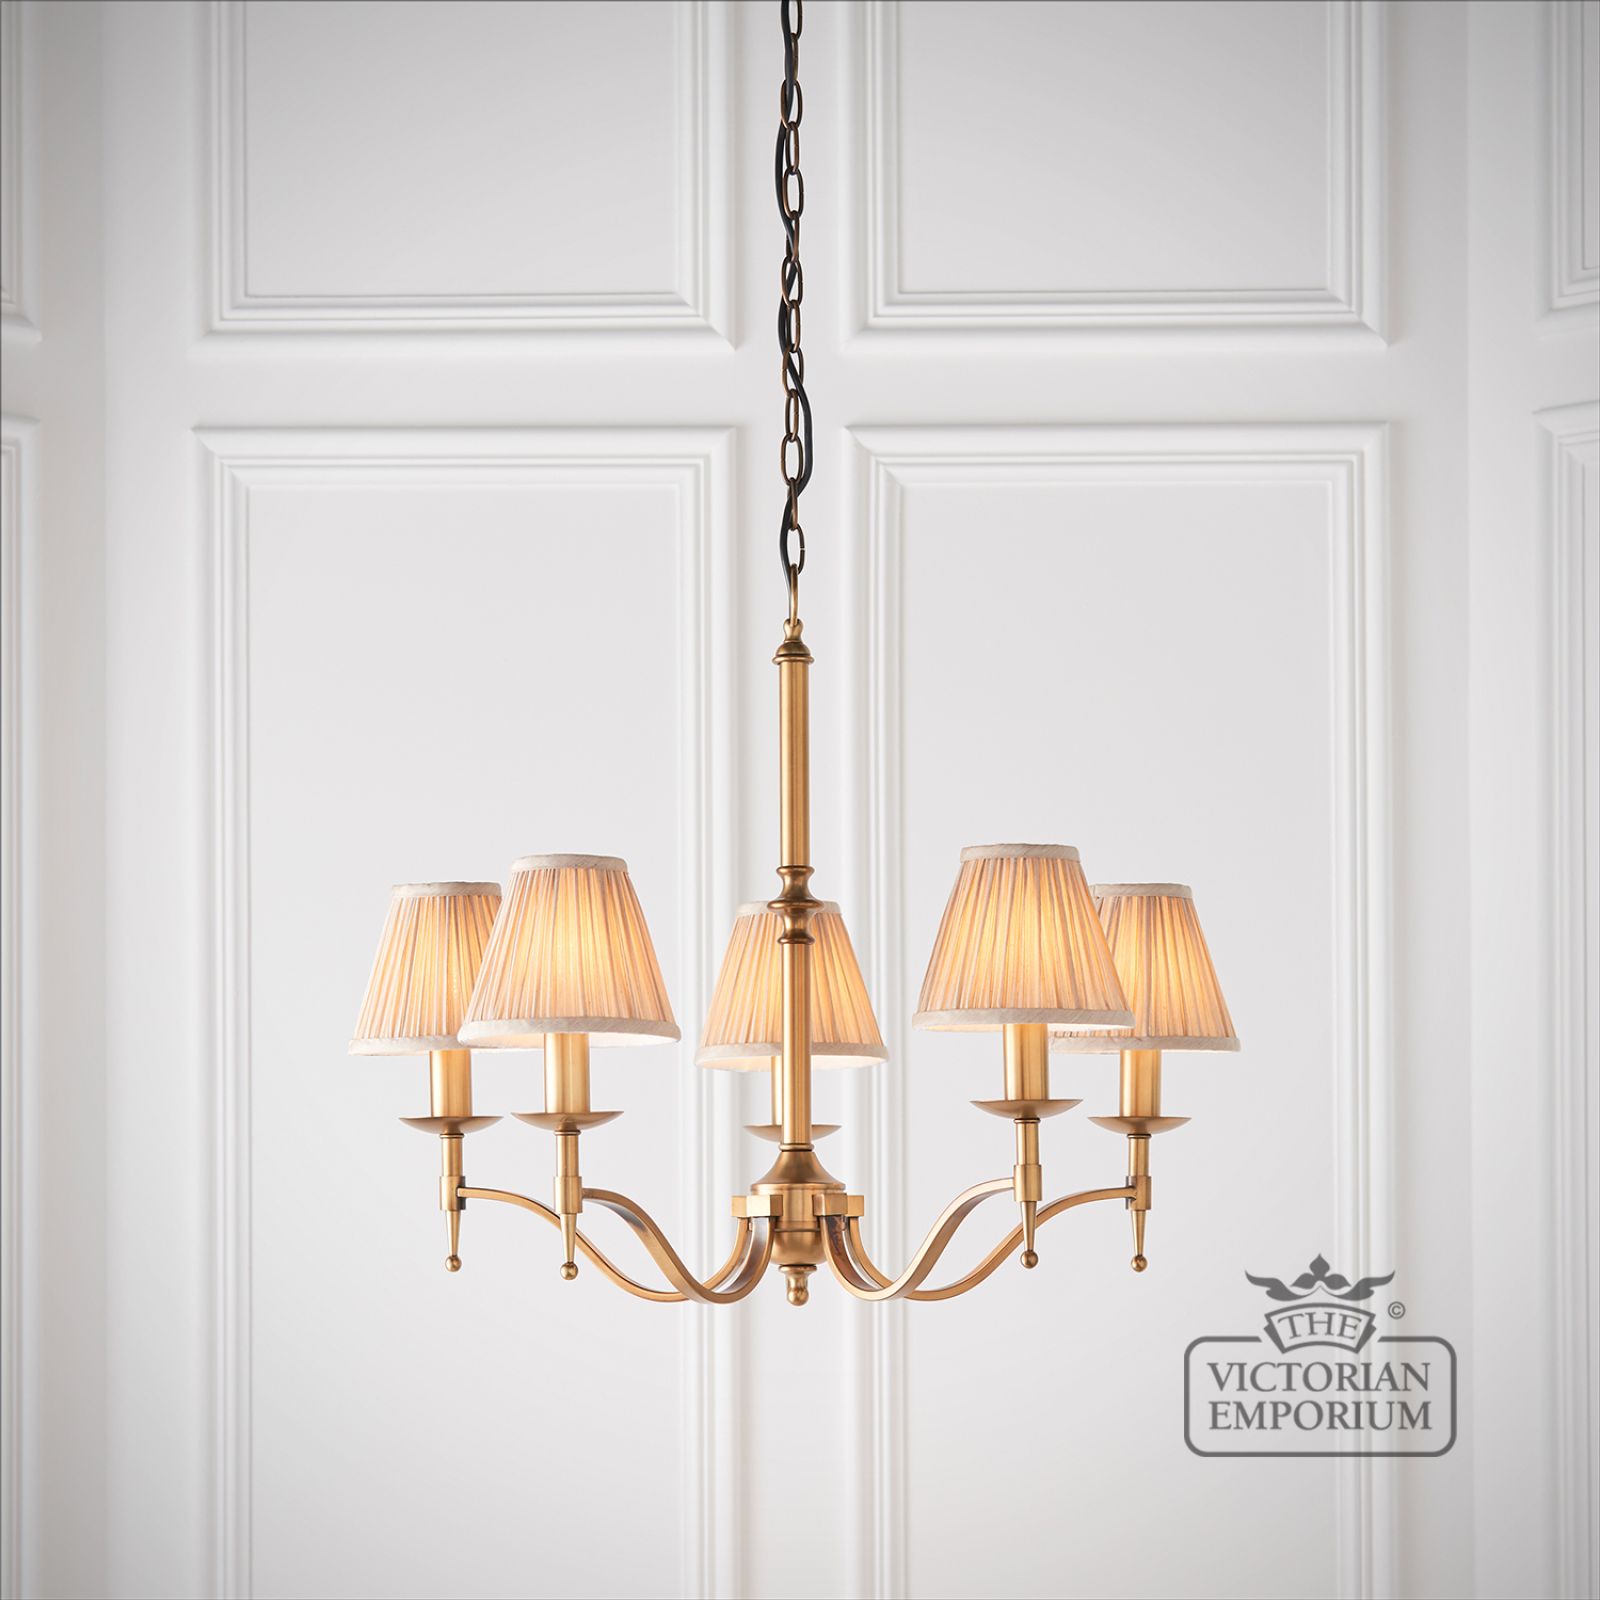 Stanford antique brass 5 light ceiling pendant with or without beige shades